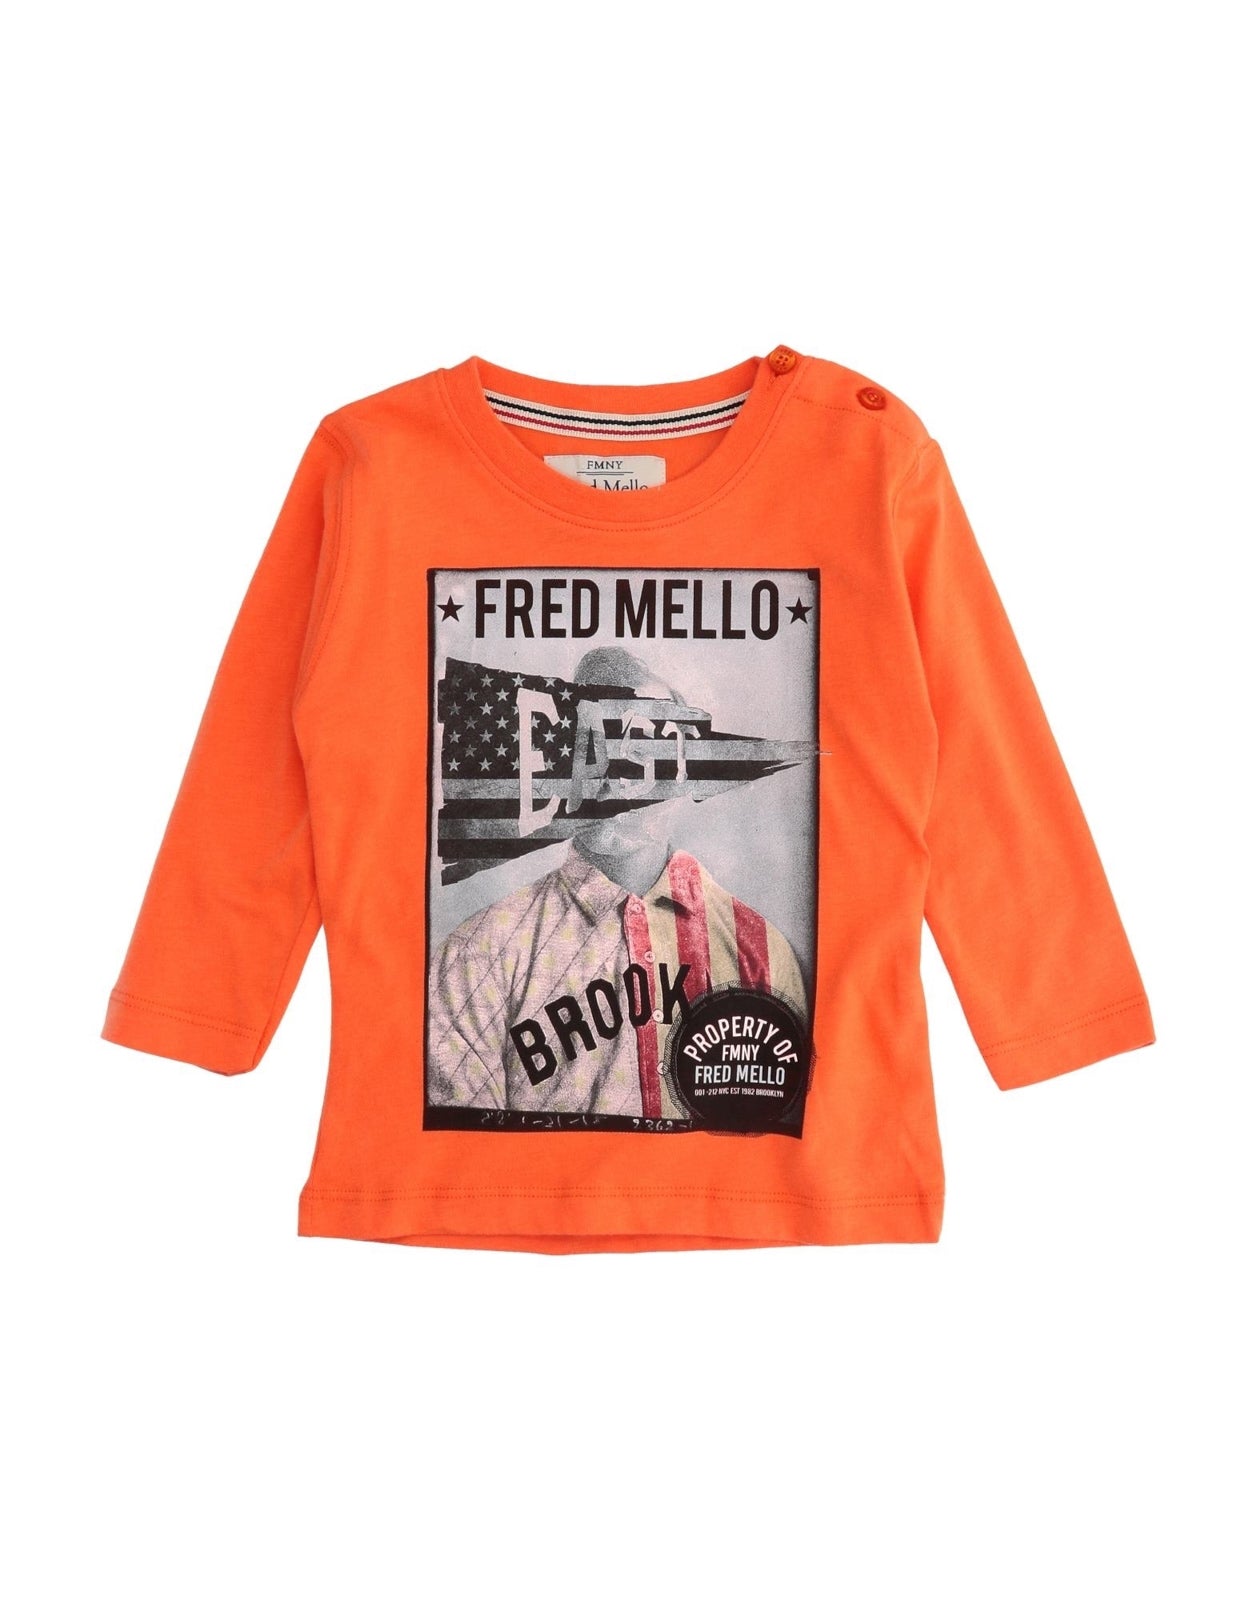 FRED MELLO T-Shirt Top Size 12M / 76CM Coated Front Made in Italy gallery main photo